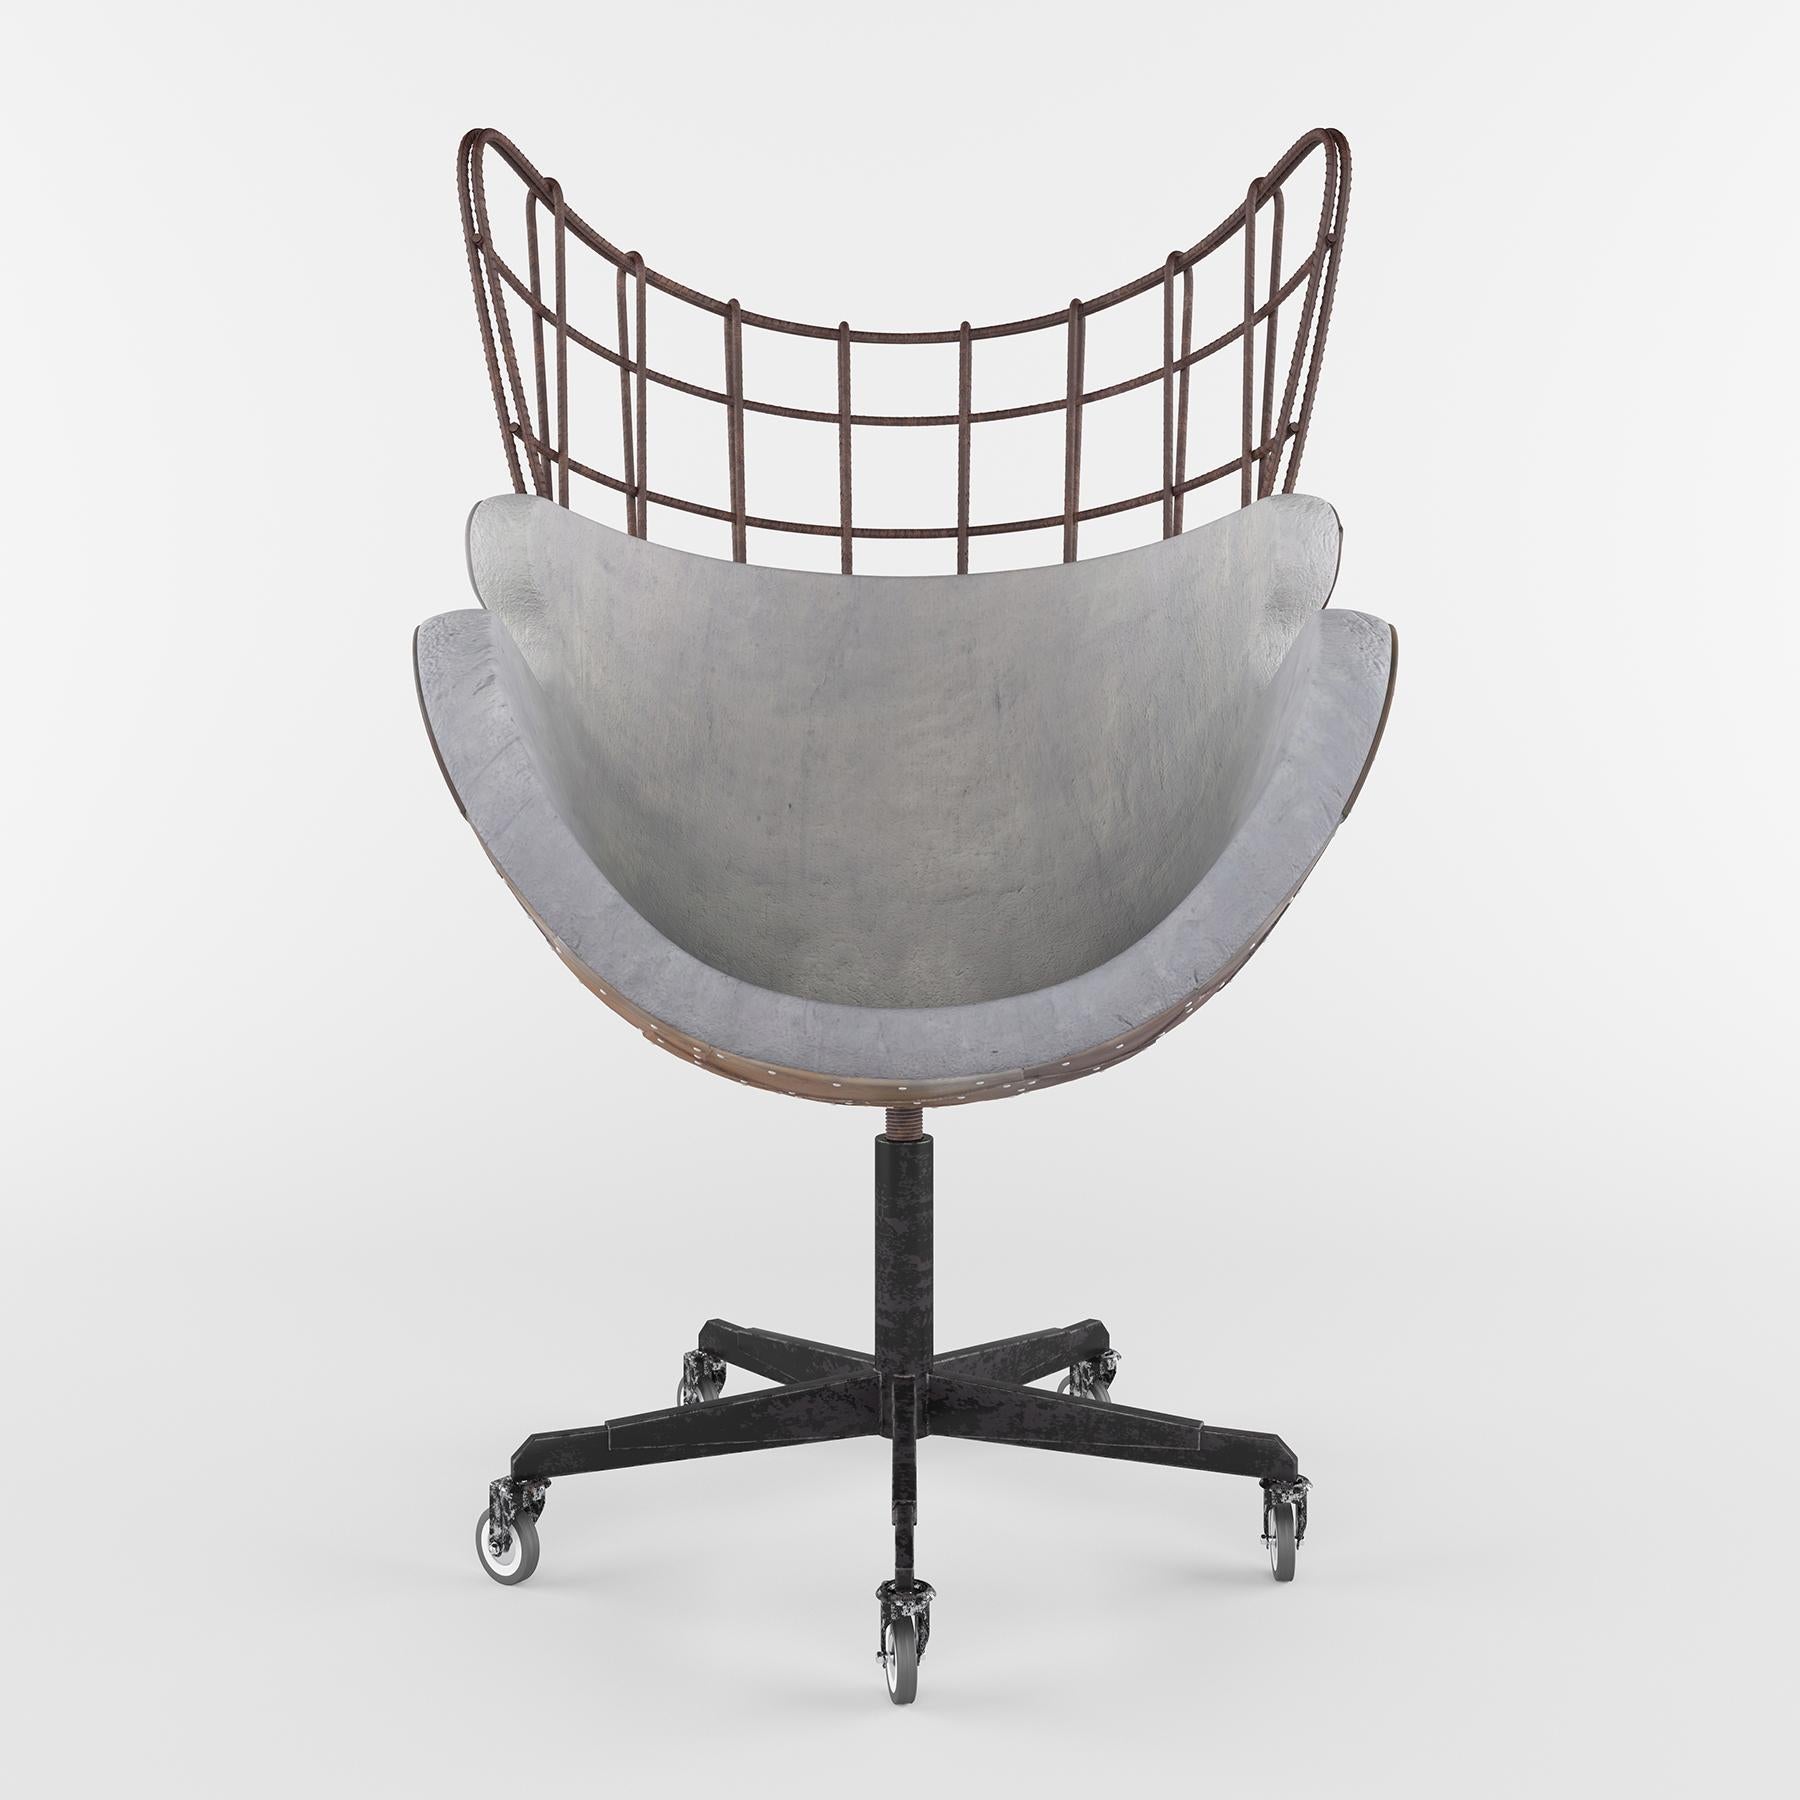 EGG chair by Arne Jacobsen. It is a stunning reinterpretation of the classic designs of the modernist era with an obvious urban twist. Constructed with concrete, rebar, and metal plates, the concrete chair’s composition brings to light the unique